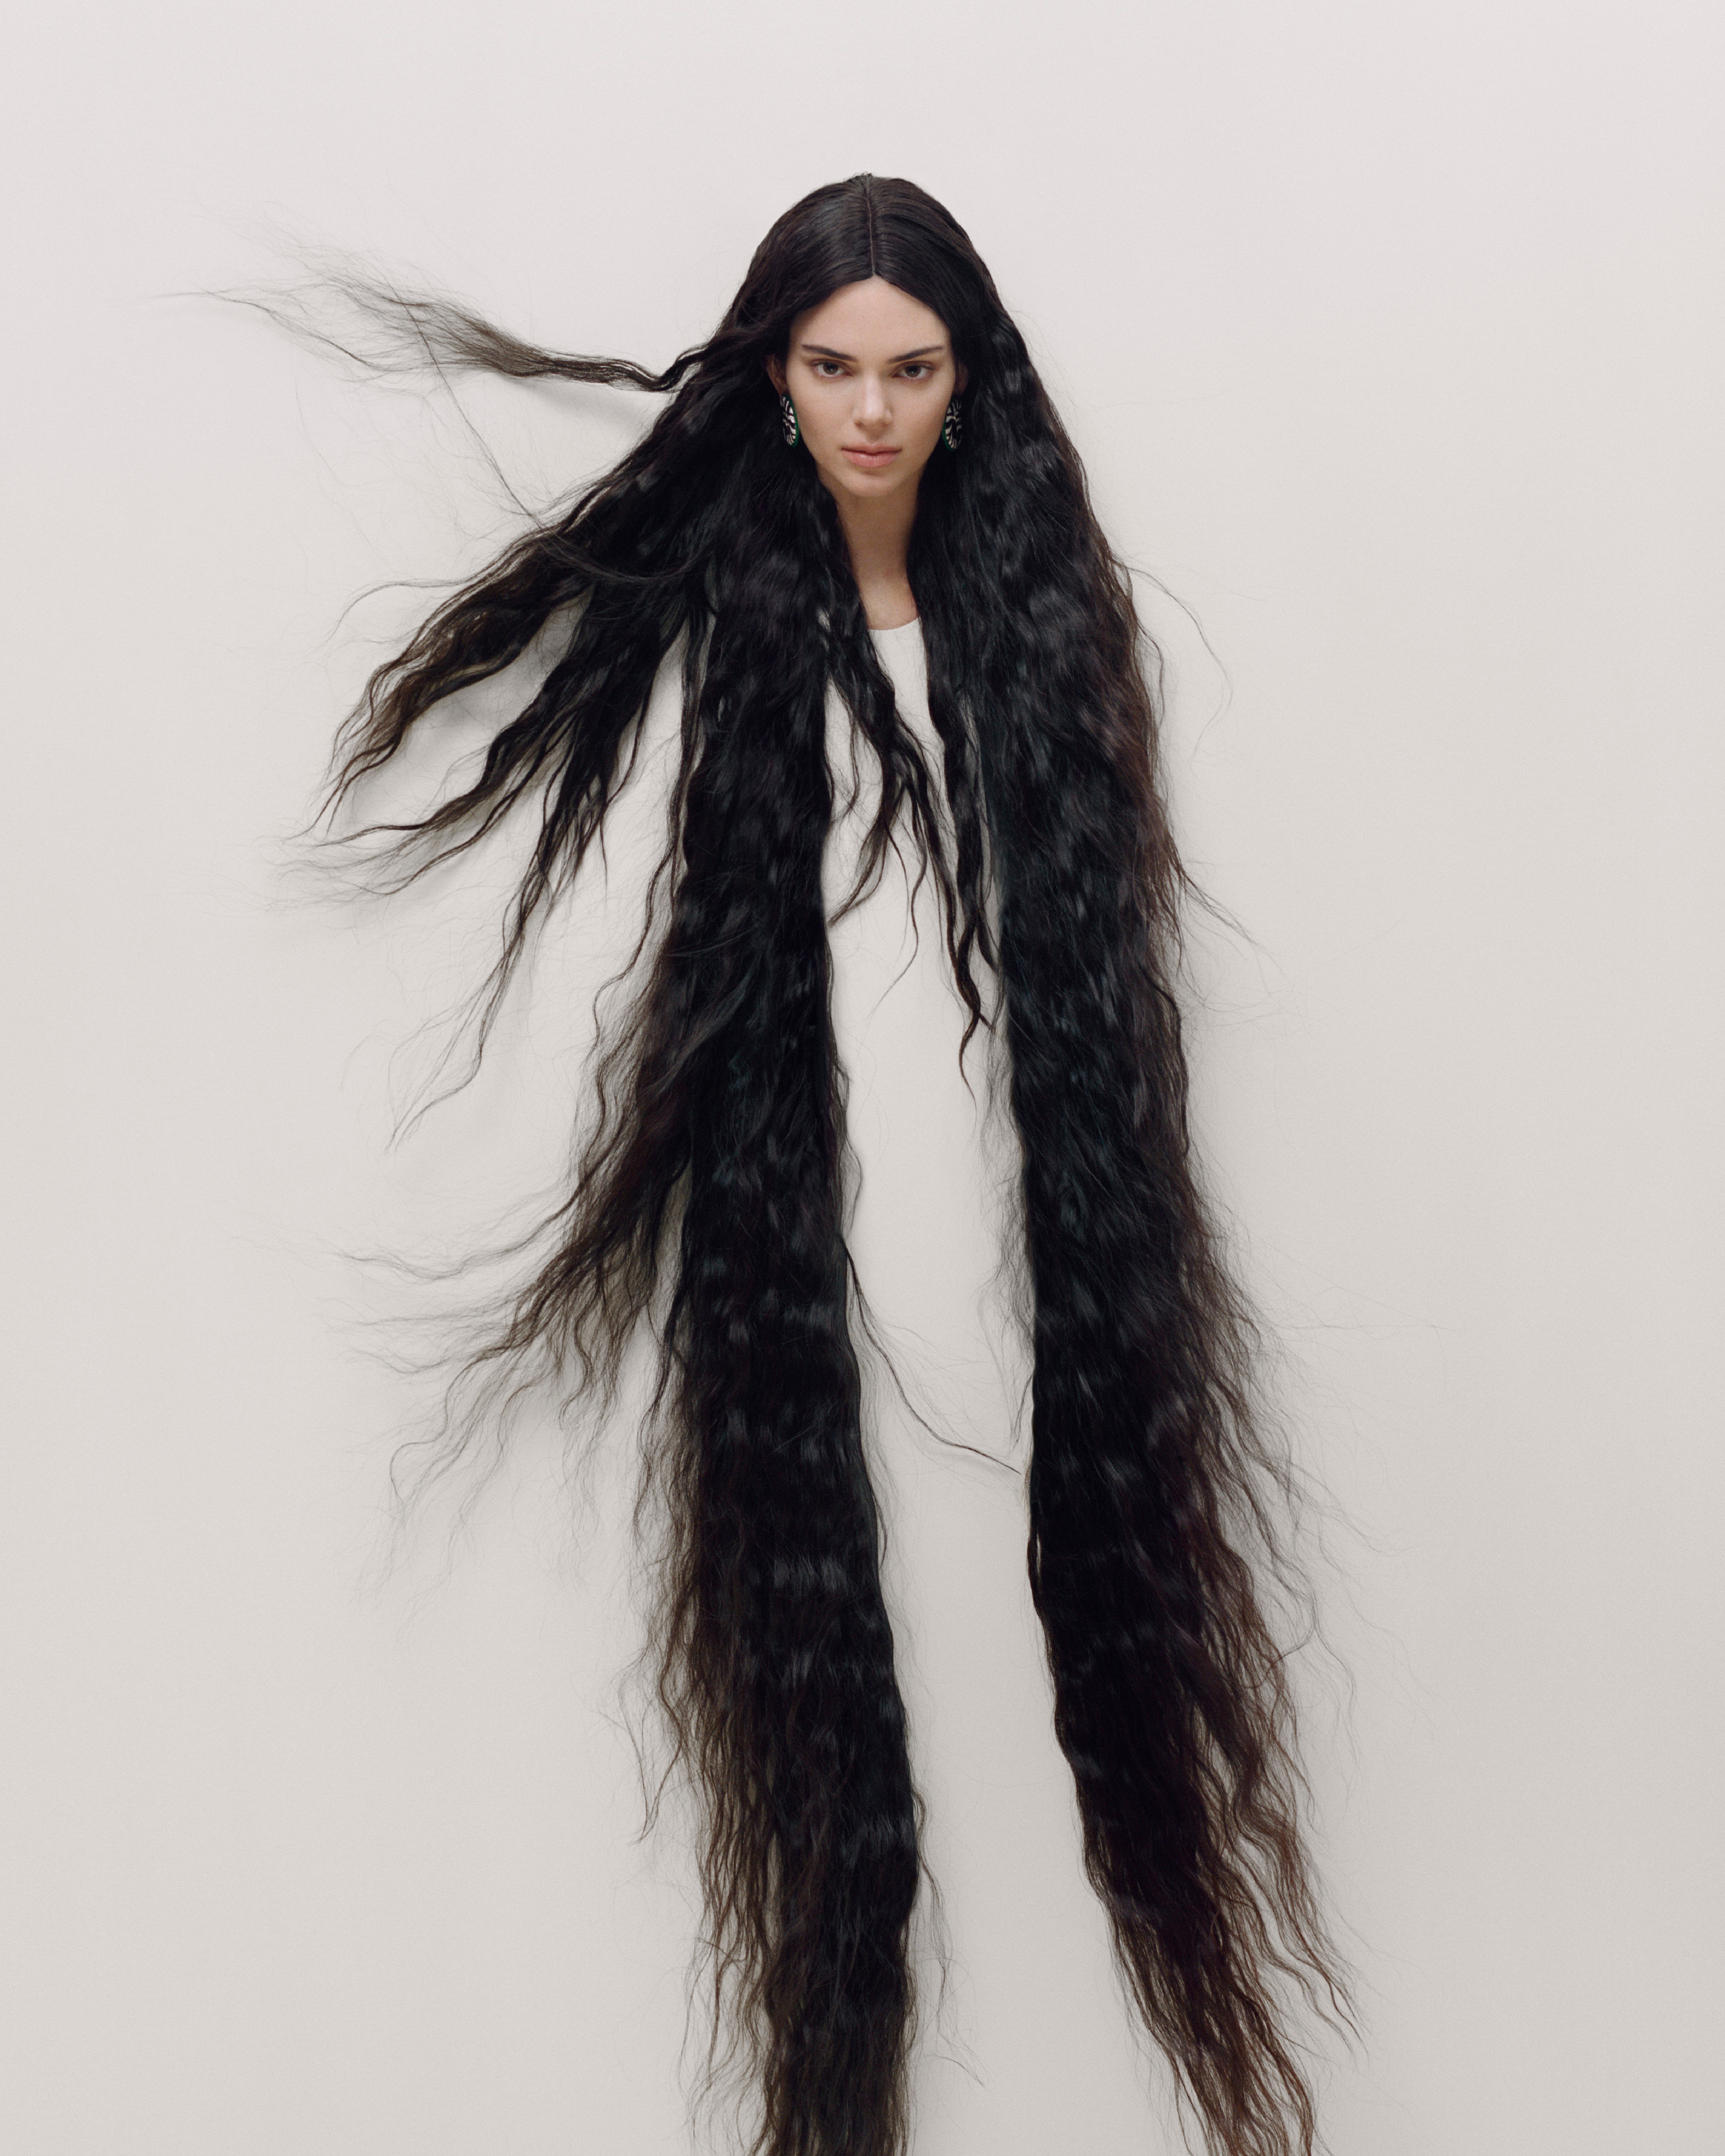 Kendall Jenner Looses her Limbs for Garage Mag - Photo 7